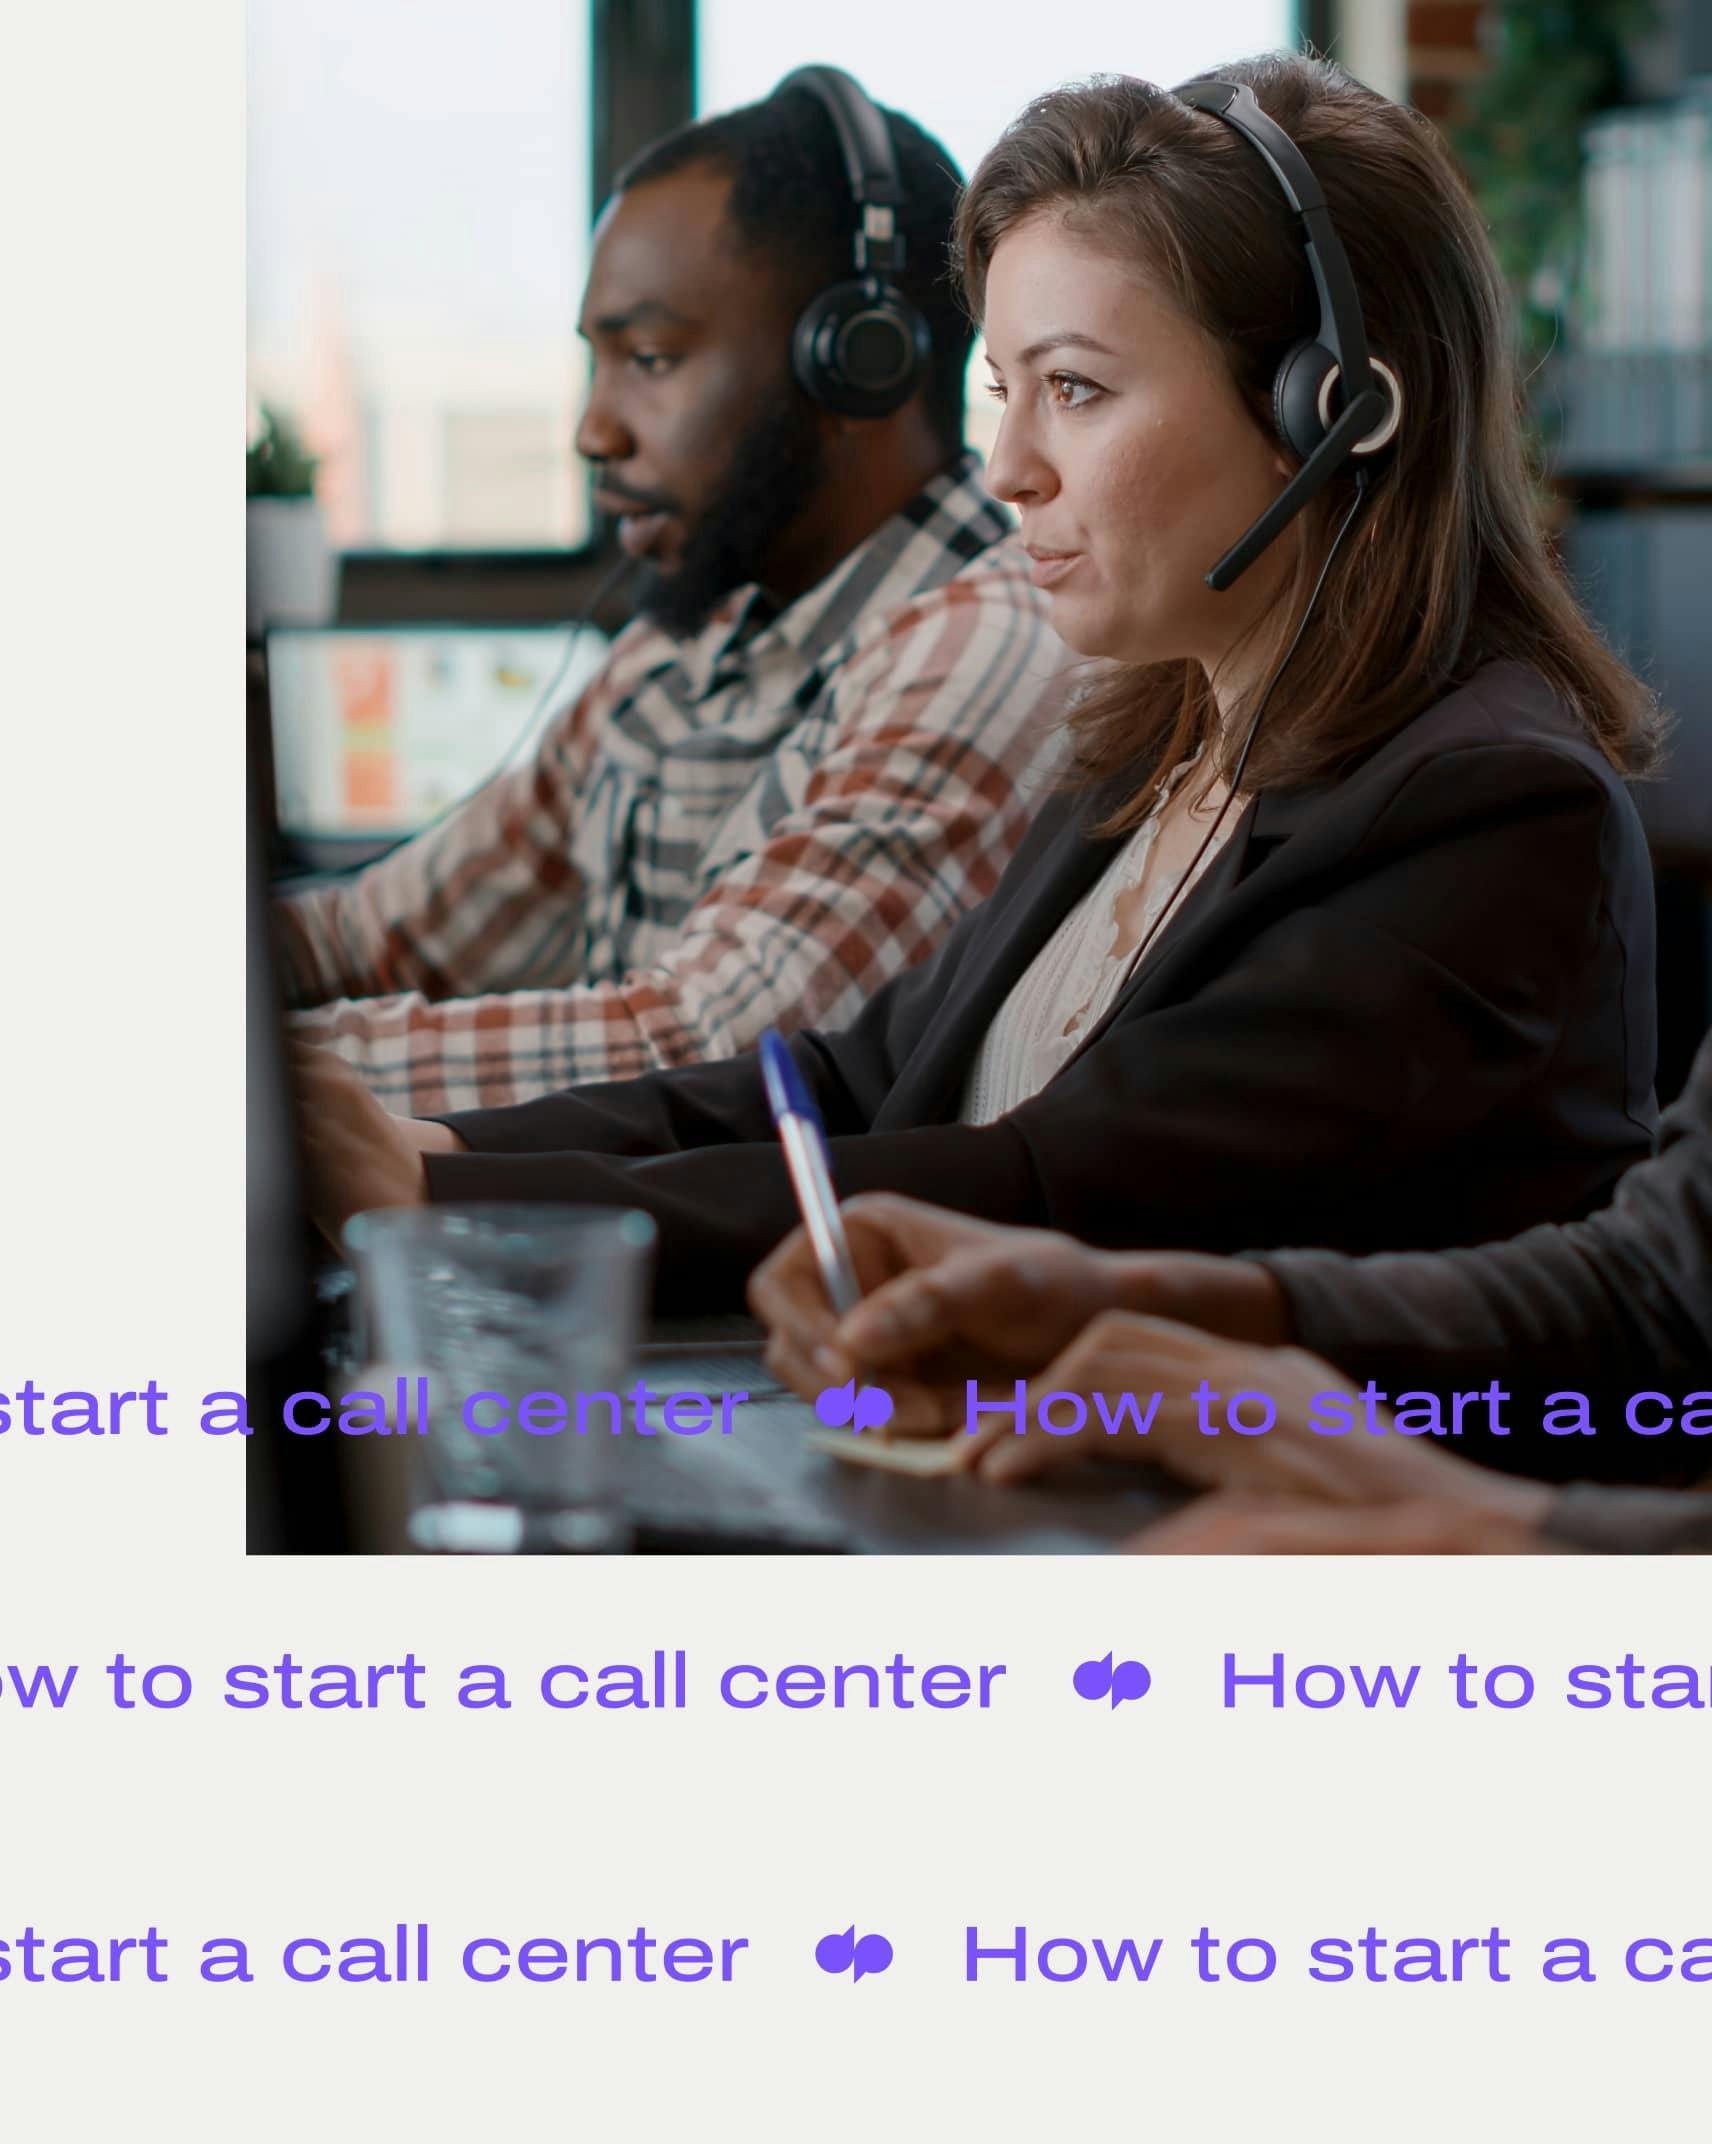 How to start a call center